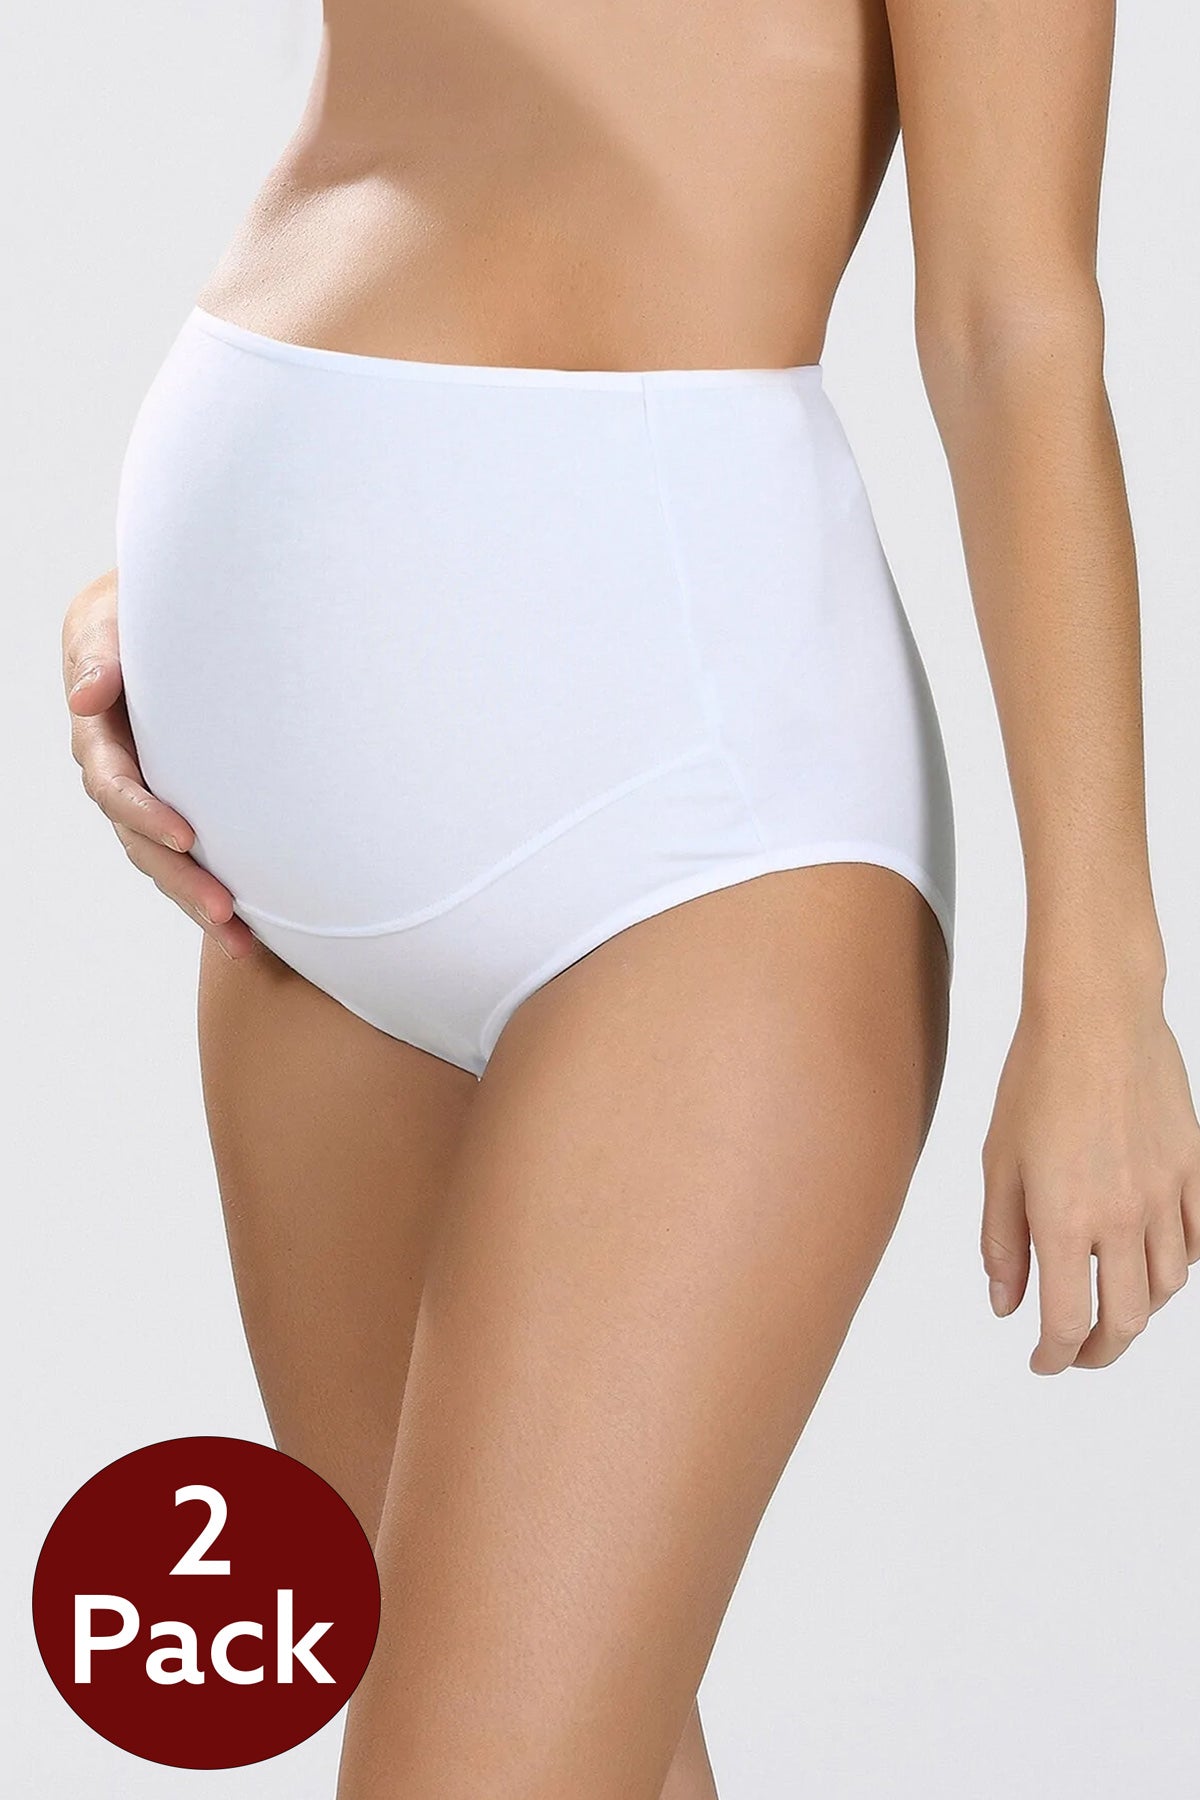 Shopymommy - 2-Pack Cotton Maternity Panties White - 540